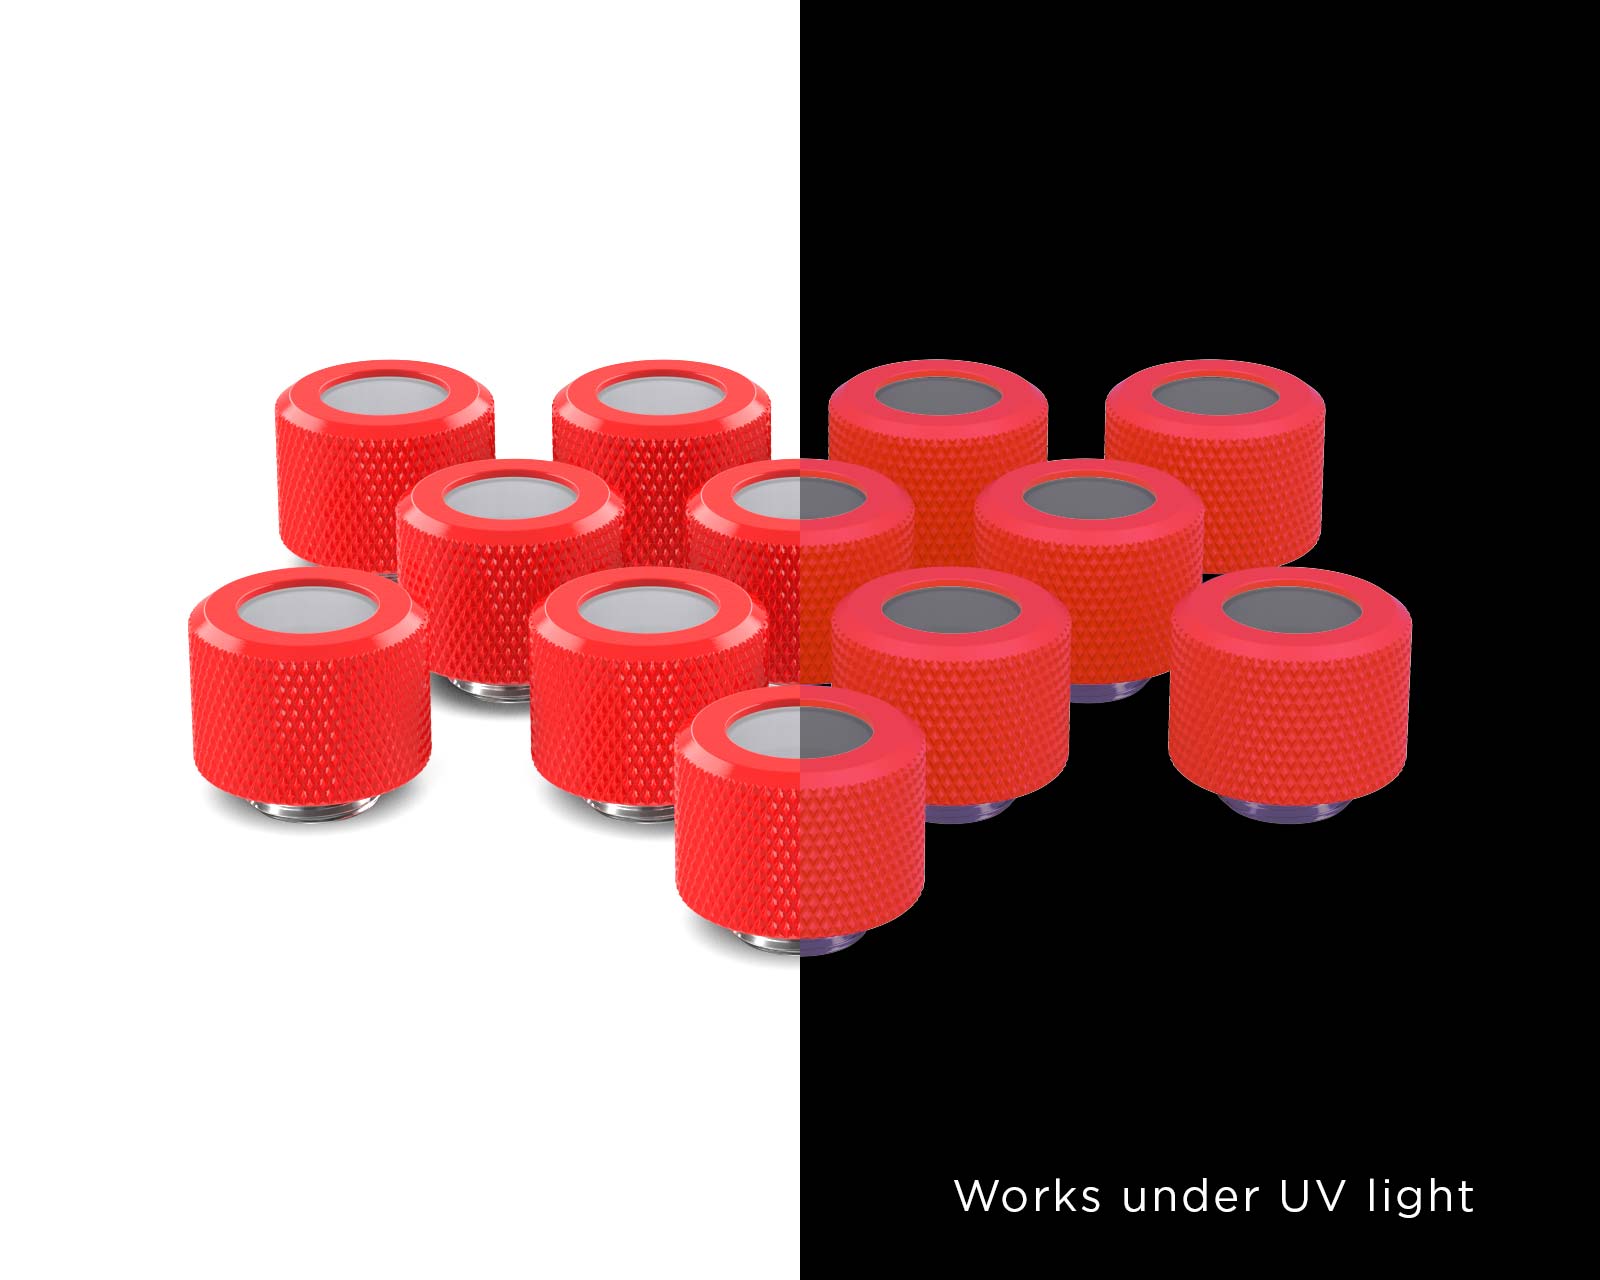 PrimoChill 12mm OD Rigid SX Fitting - 12 Pack - PrimoChill - KEEPING IT COOL UV Red